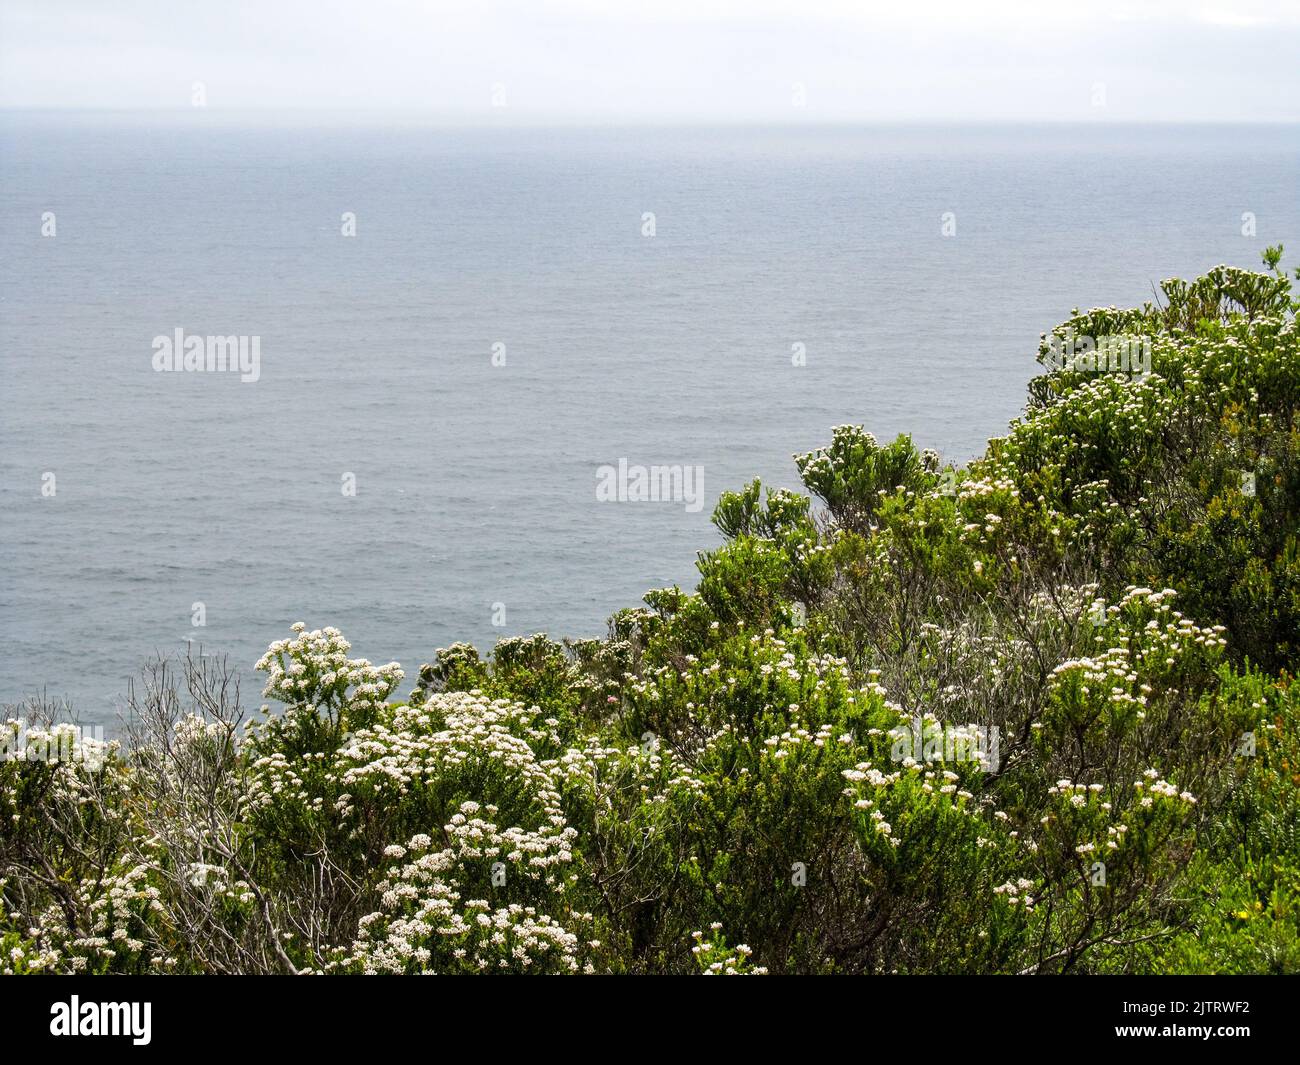 A mass of flowering white fynbos along the cliffs of the Tsitsikamma Coastline, South Africa, with the Southern Indian Ocean in the Background Stock Photo